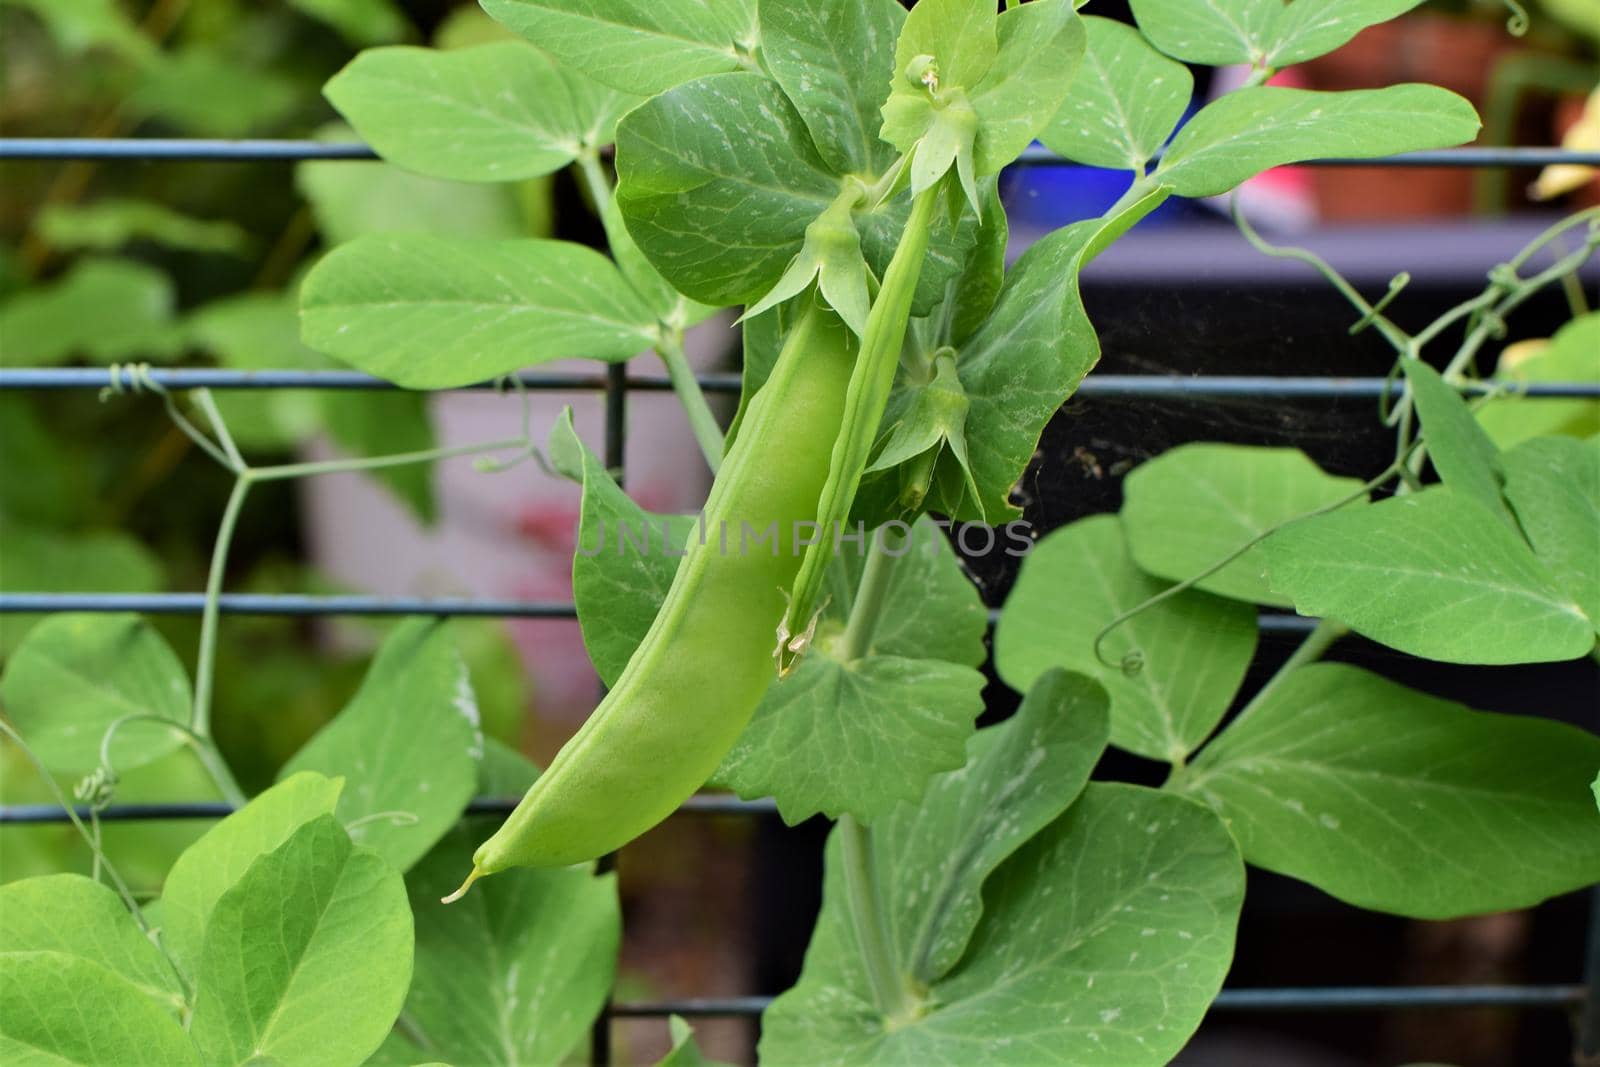 Green peas growing on a bush in the garden by Luise123